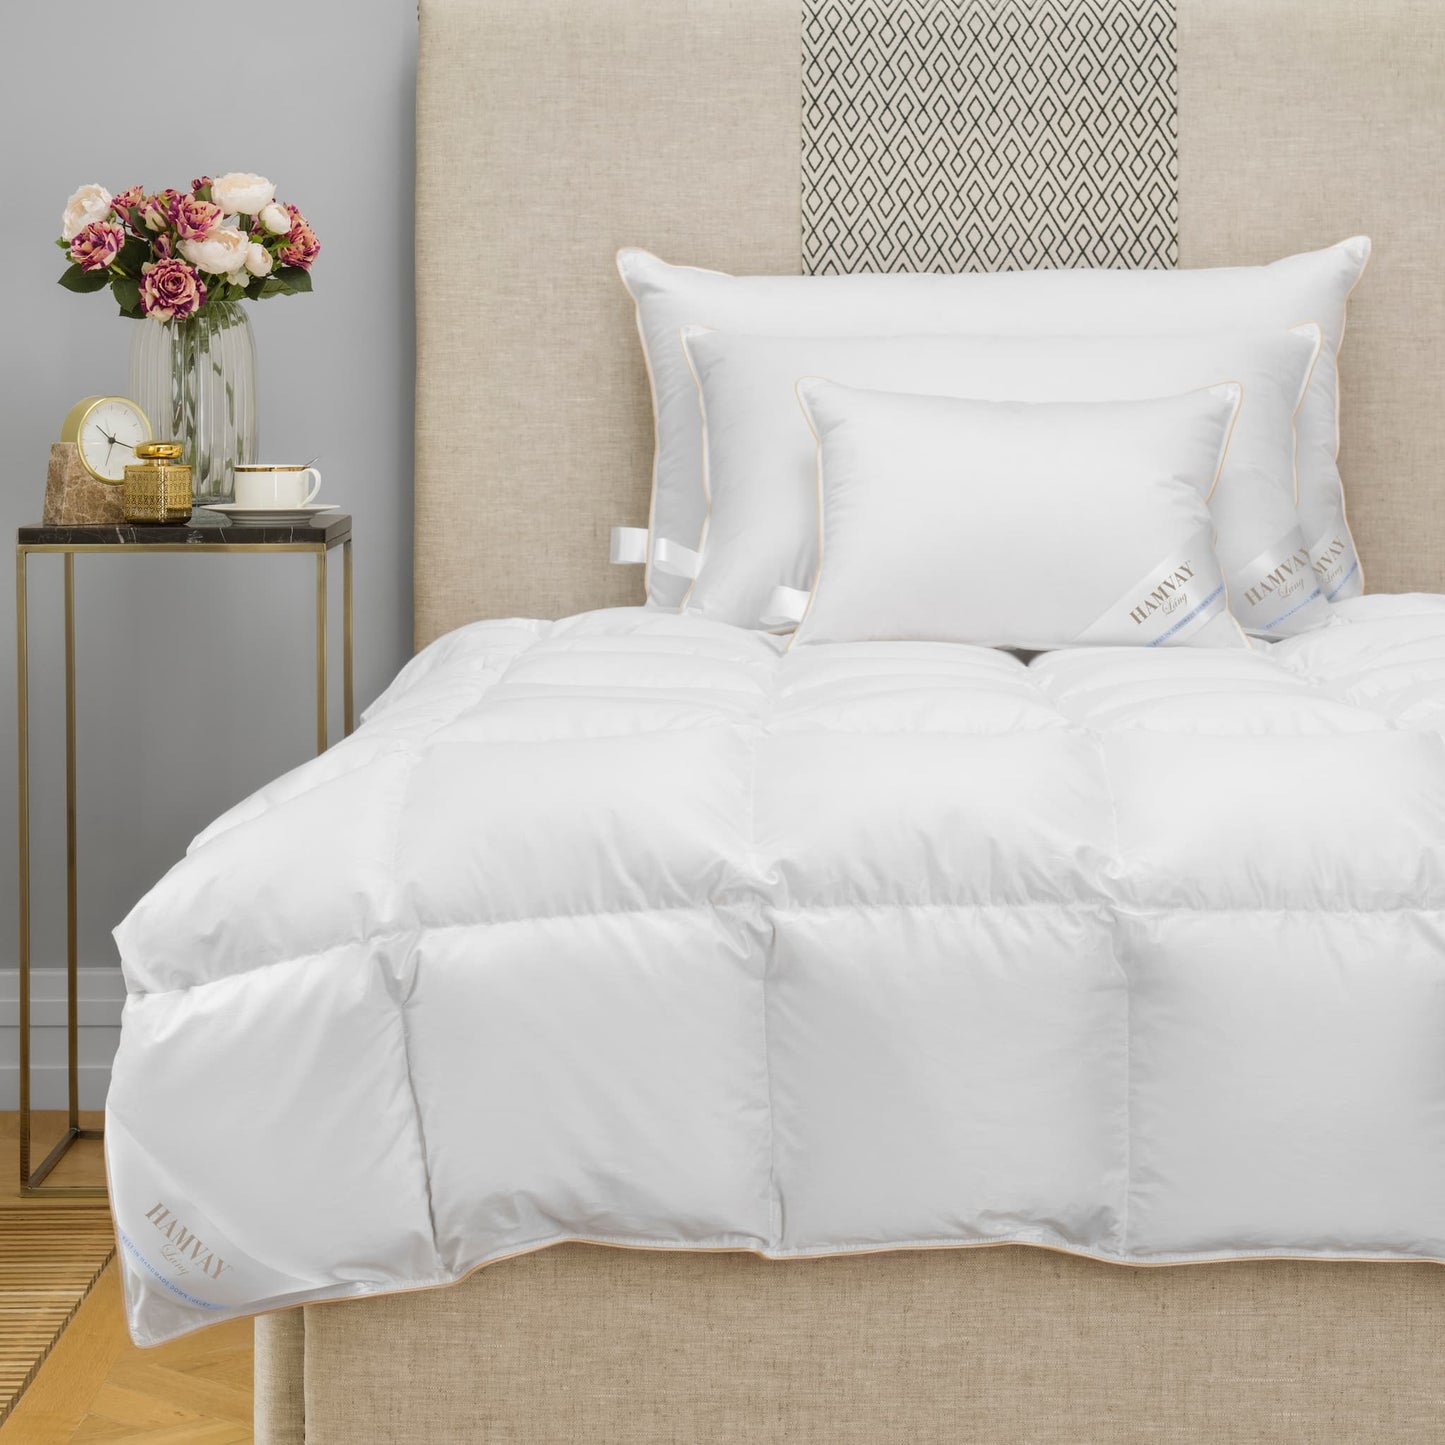 Luxurious Hungarian goose down comforter and pillows on a beige bed